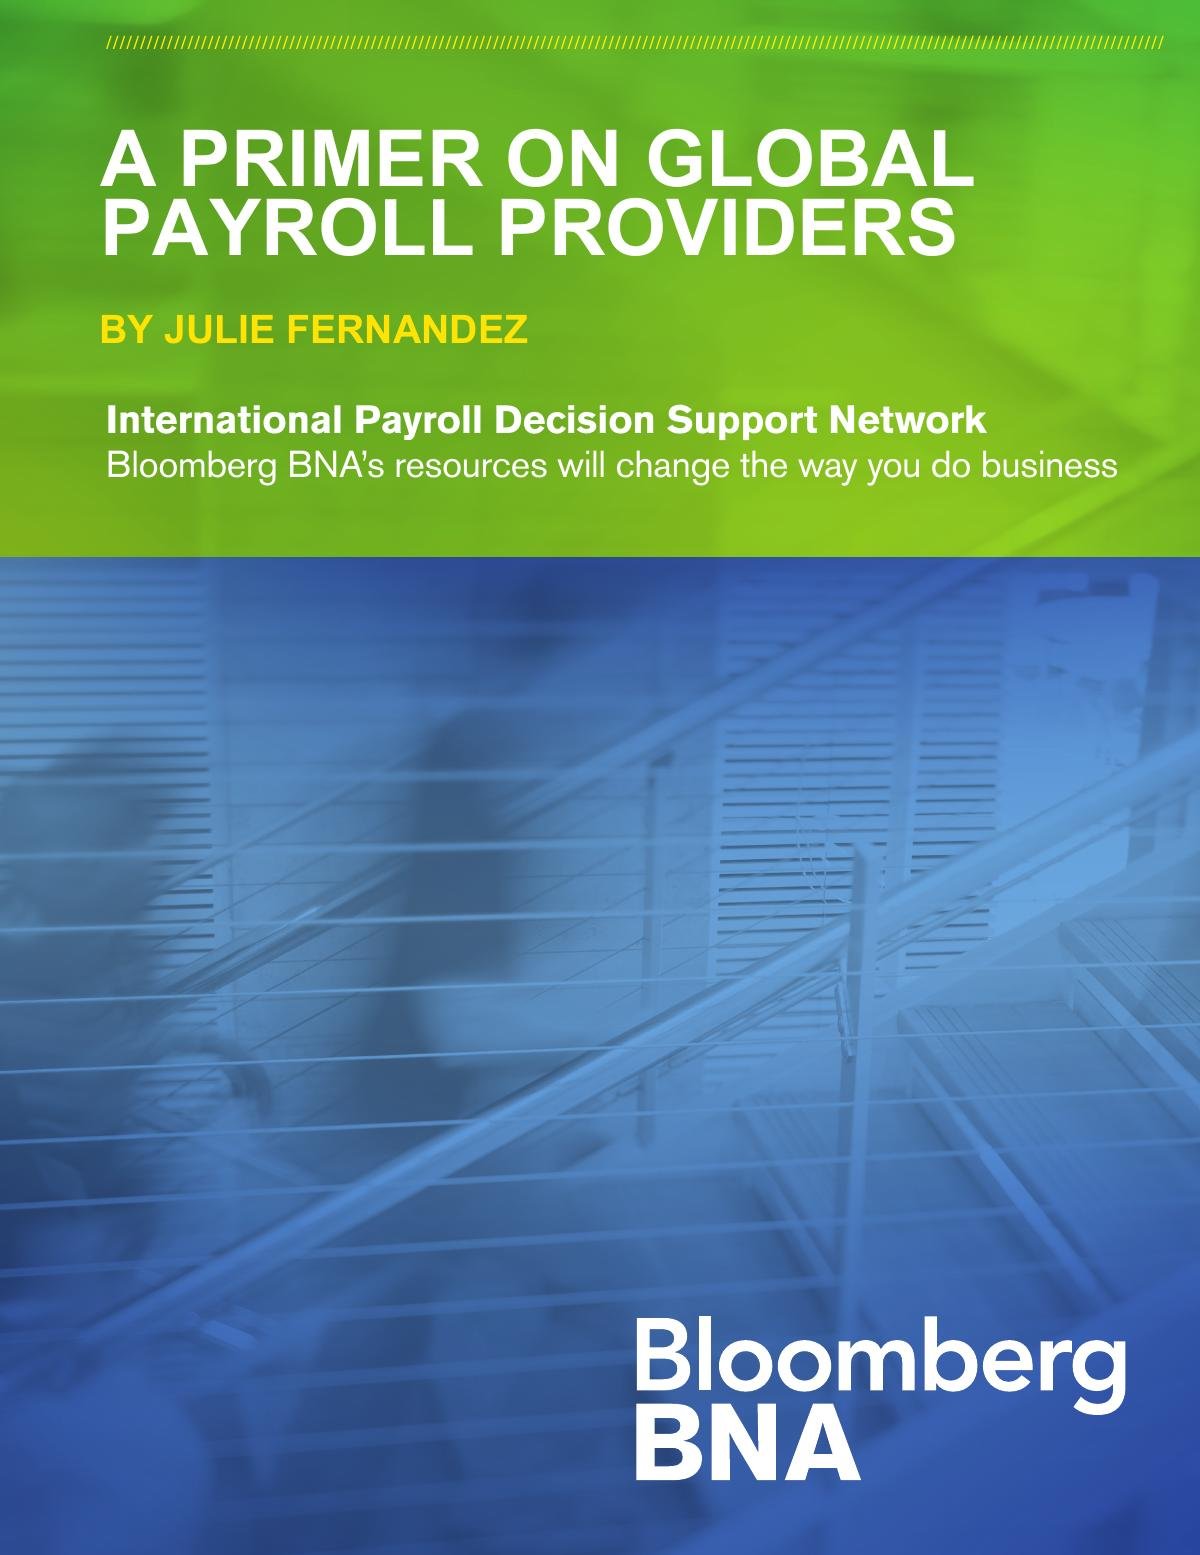 A Primer on Global Payroll Providers